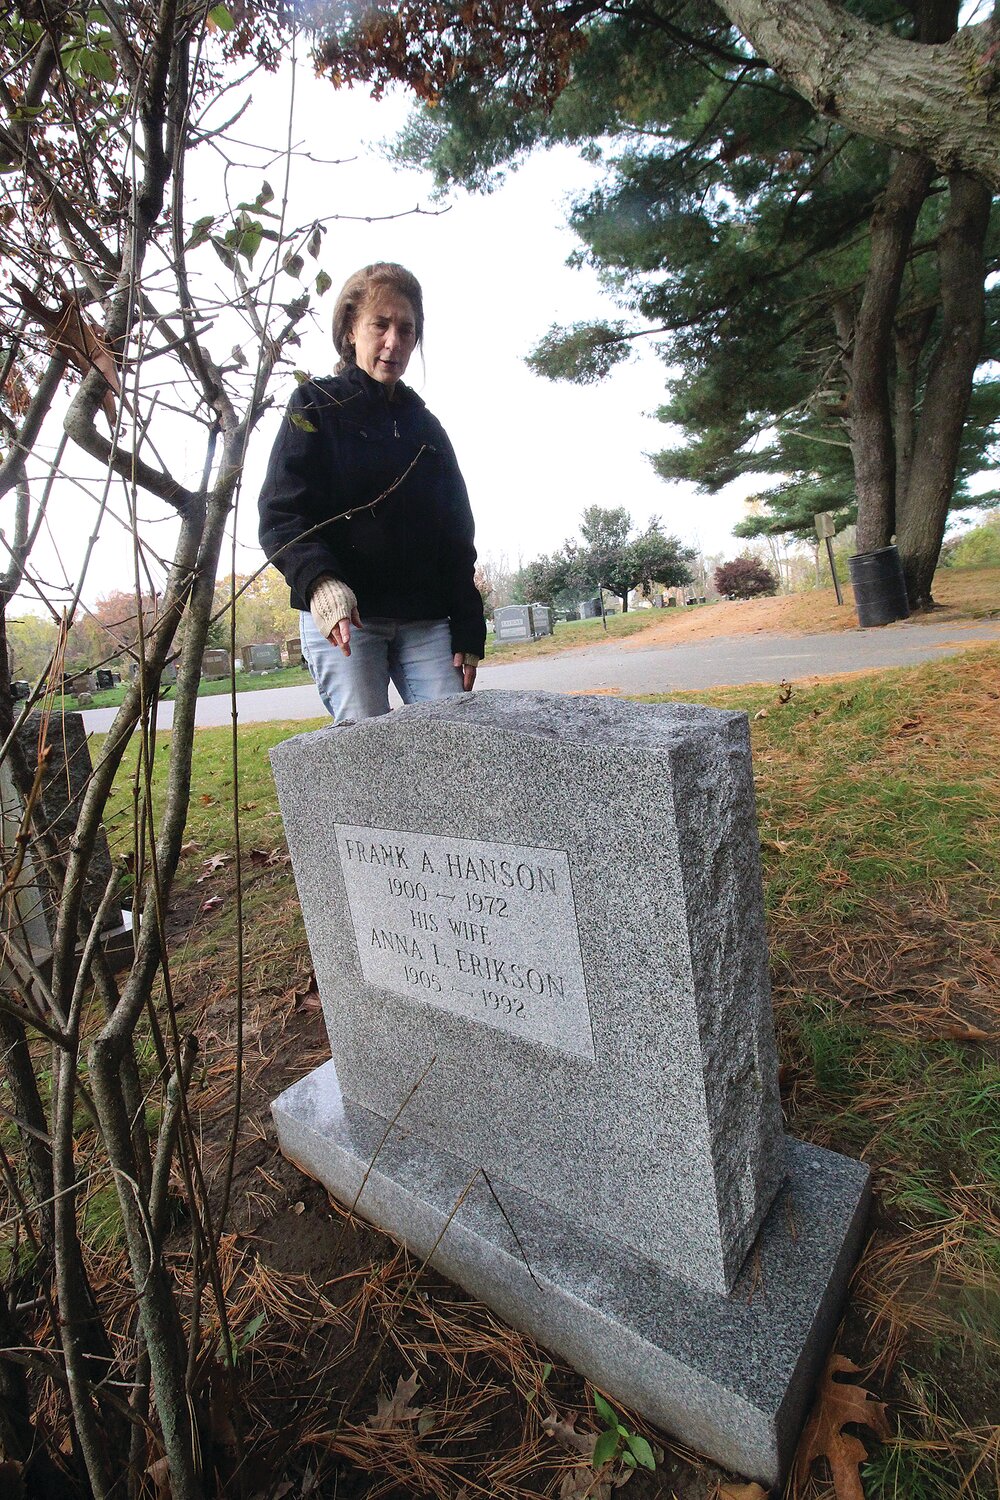 BRINGING THEM TOGETHER:  When  Frank’s kin  could not be located to gain approval to place a stone next to his parents’ marker, Gloria Coppola paid to have a bench placed across from their final resting place.